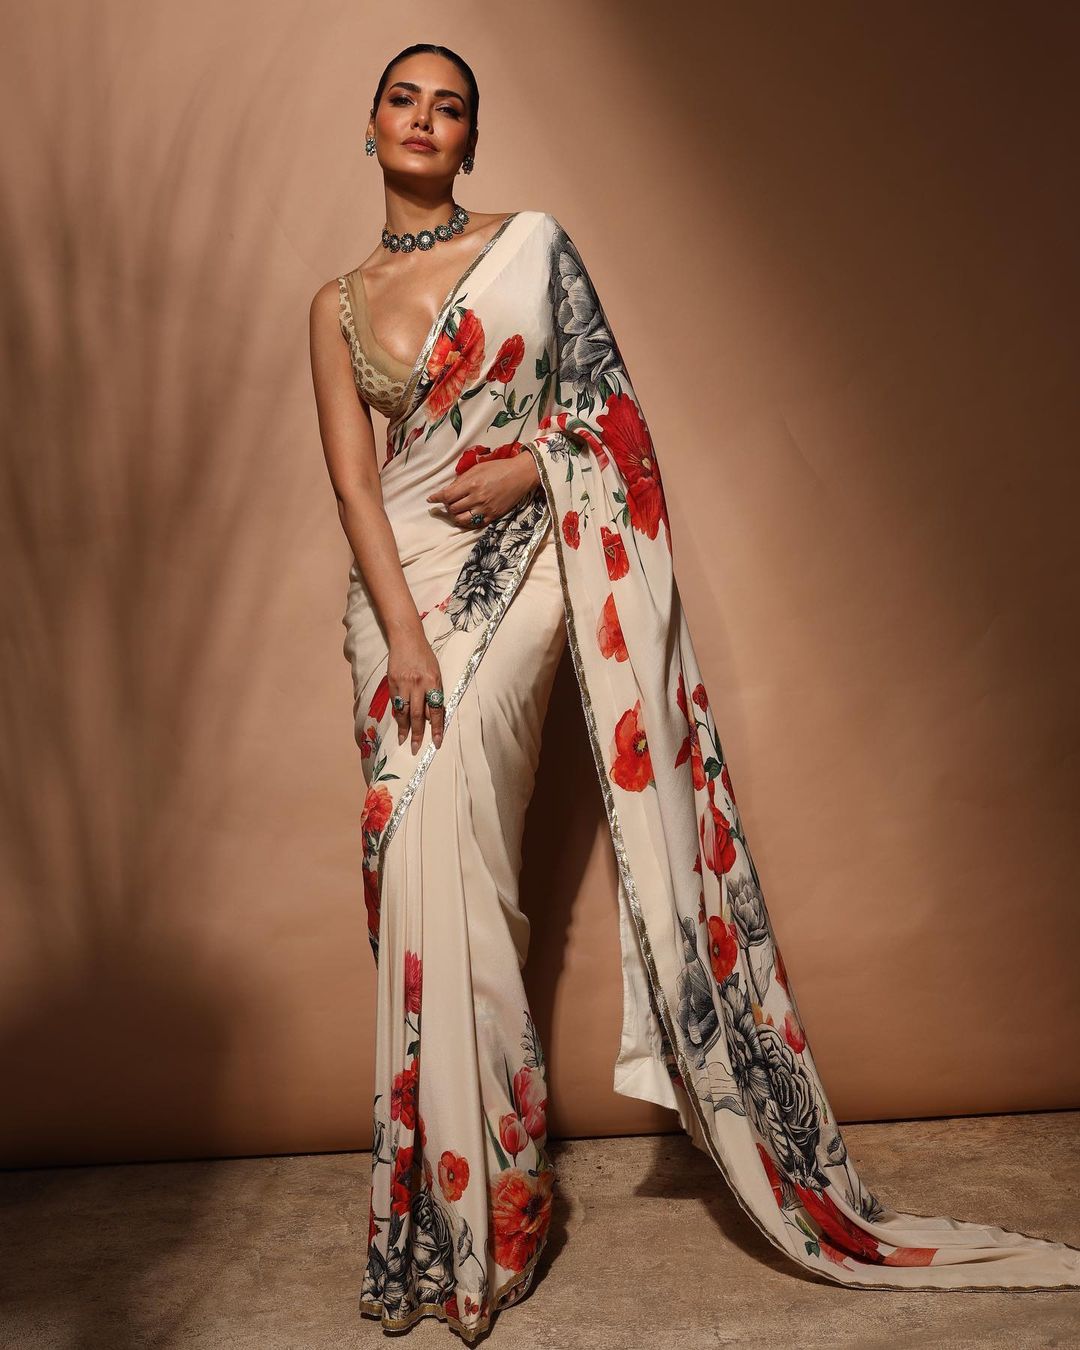 Esha Gupta In White Floral Saree Is Elegance Personified, Check Out The  Diva's Gorgeous Saree Moments